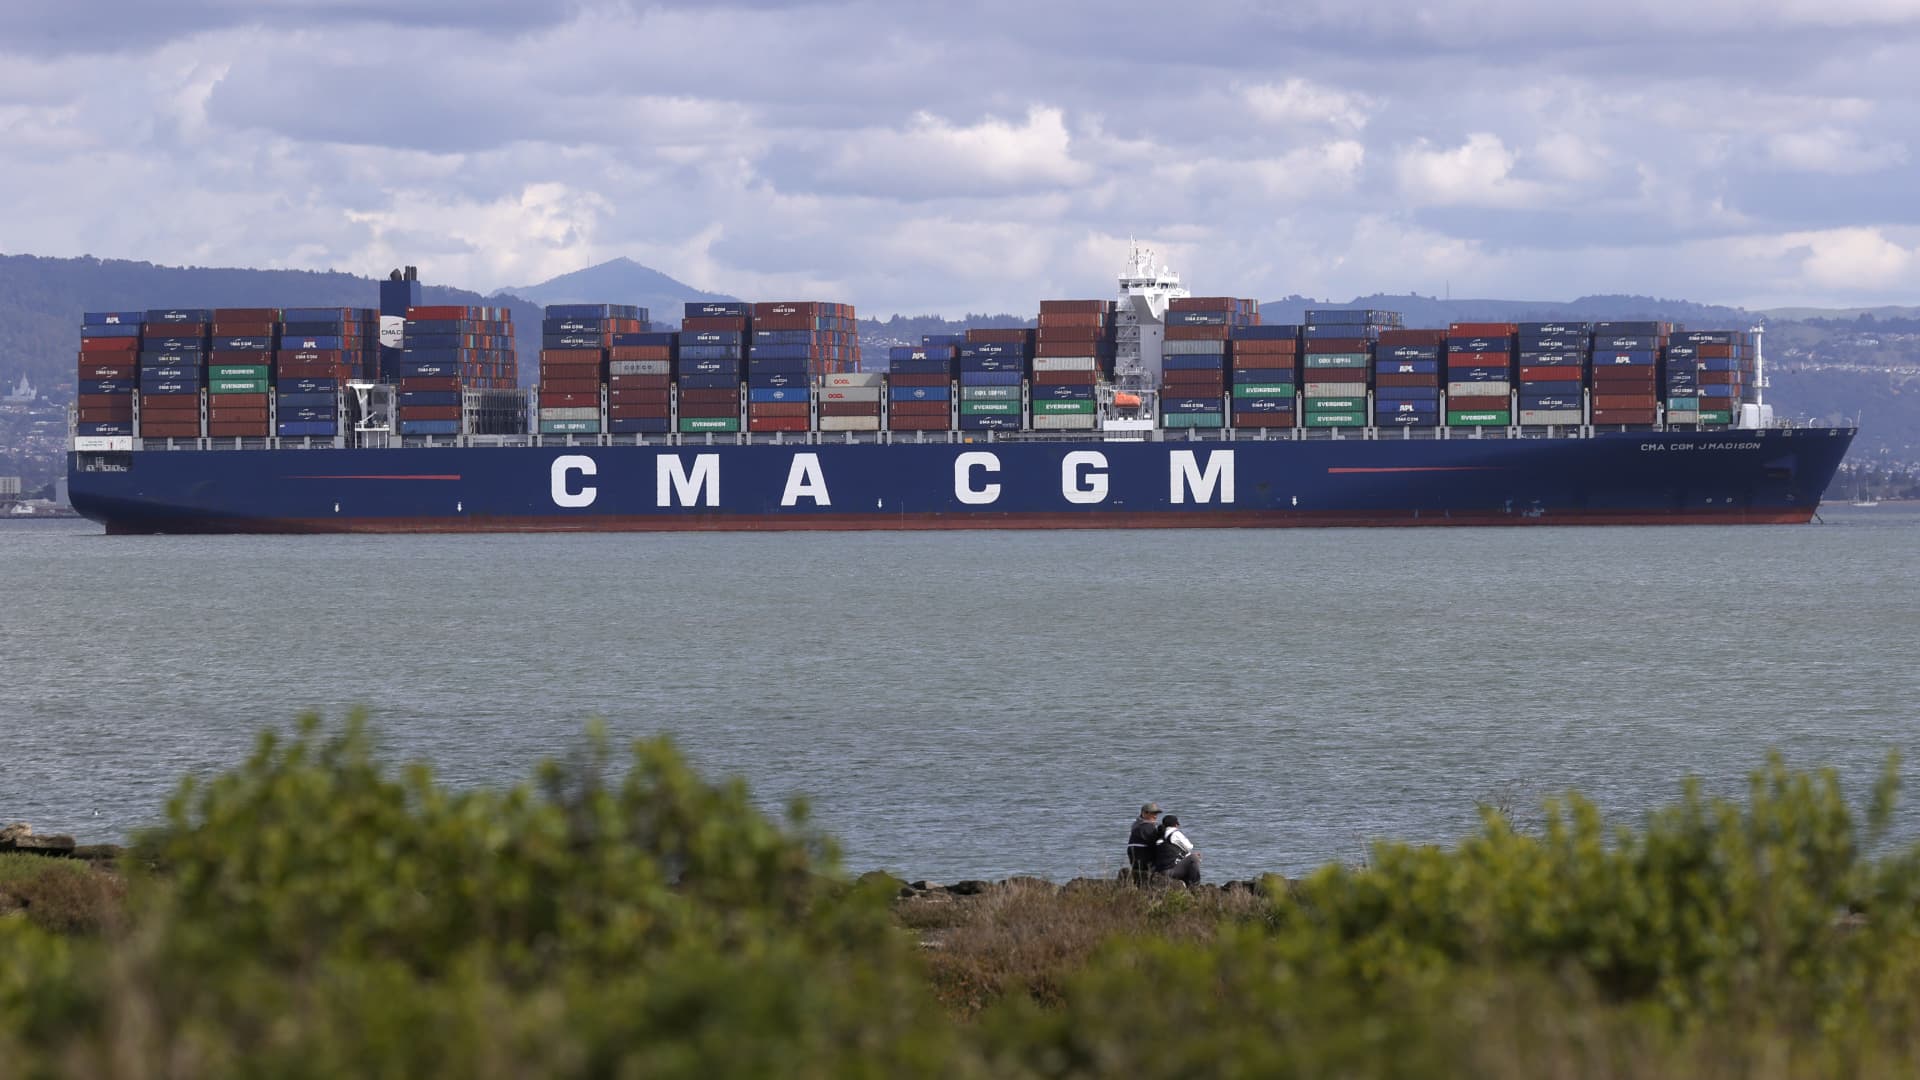 A fully loaded container ship sits anchored in the San Francisco Bay on March 09, 2021 in San Francisco, California. As the global pandemic has fueled online shopping and international shipping to fulfill orders, metal shipping containers have become scarce and have caused log jams at ports around the globe.